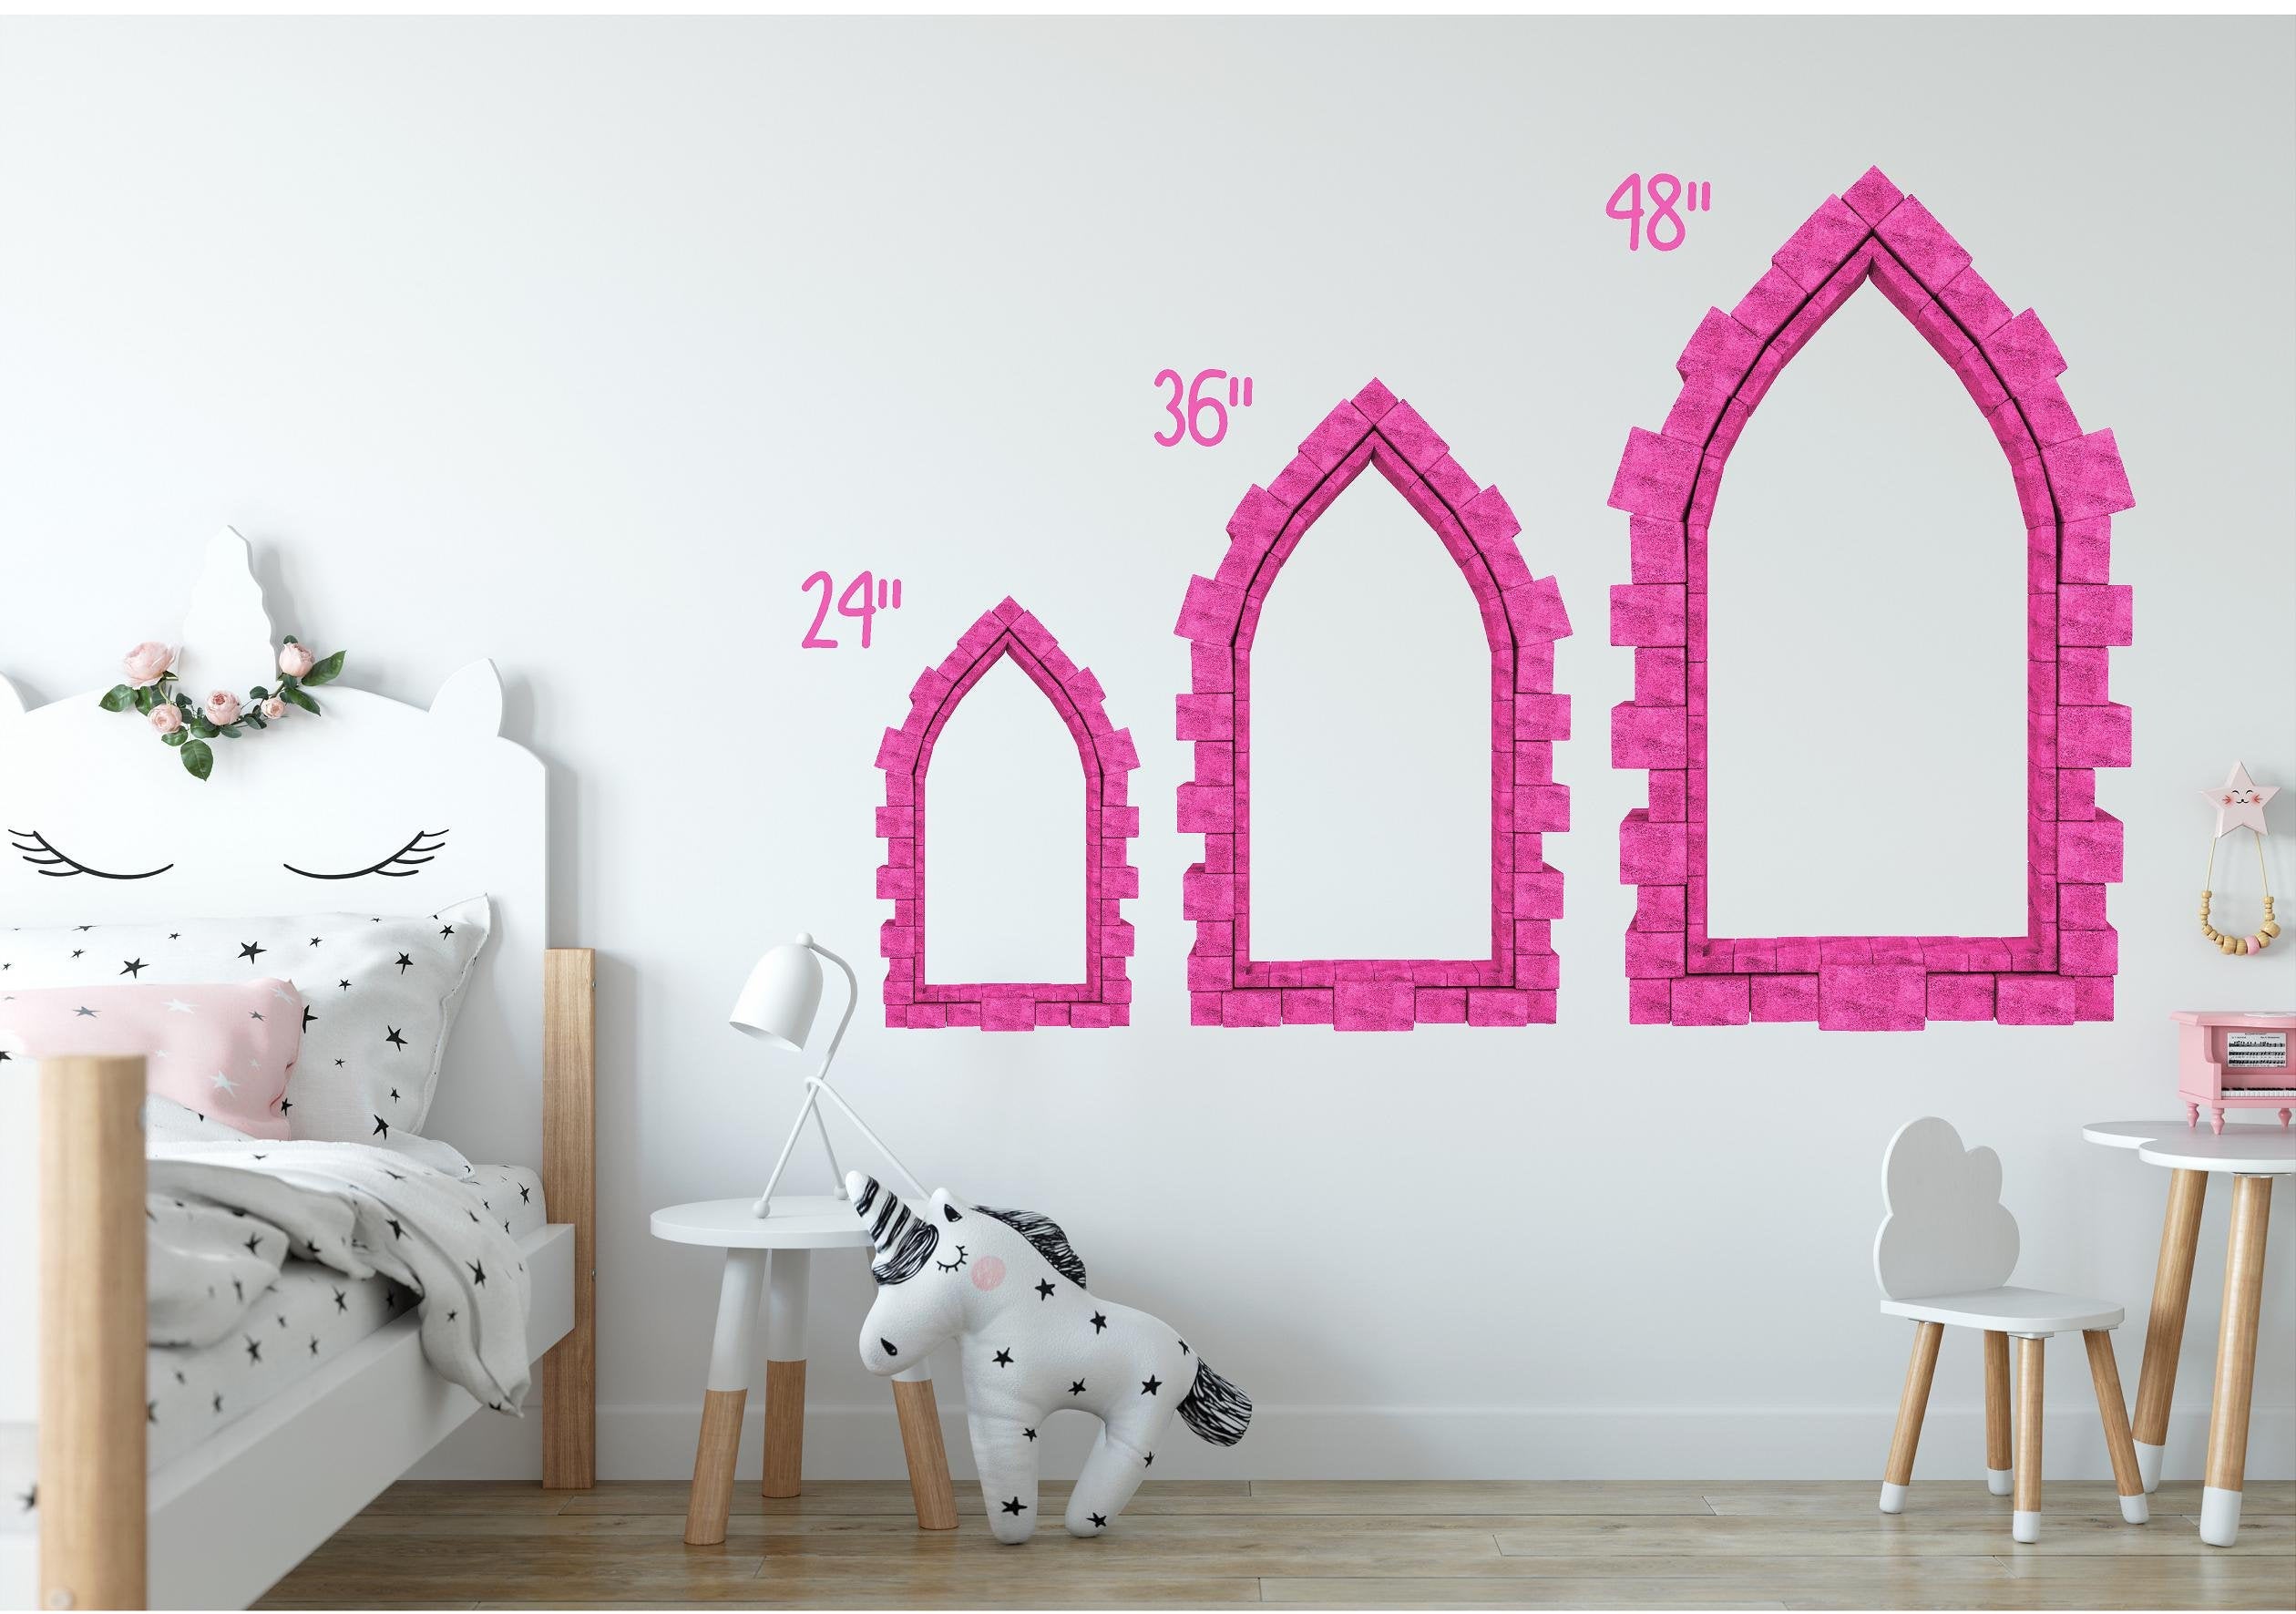 3D Castle Window Magic Wishing Well Wall Decal Fairy Tale Removable Fabric Vinyl Wall Sticker | DecalBaby